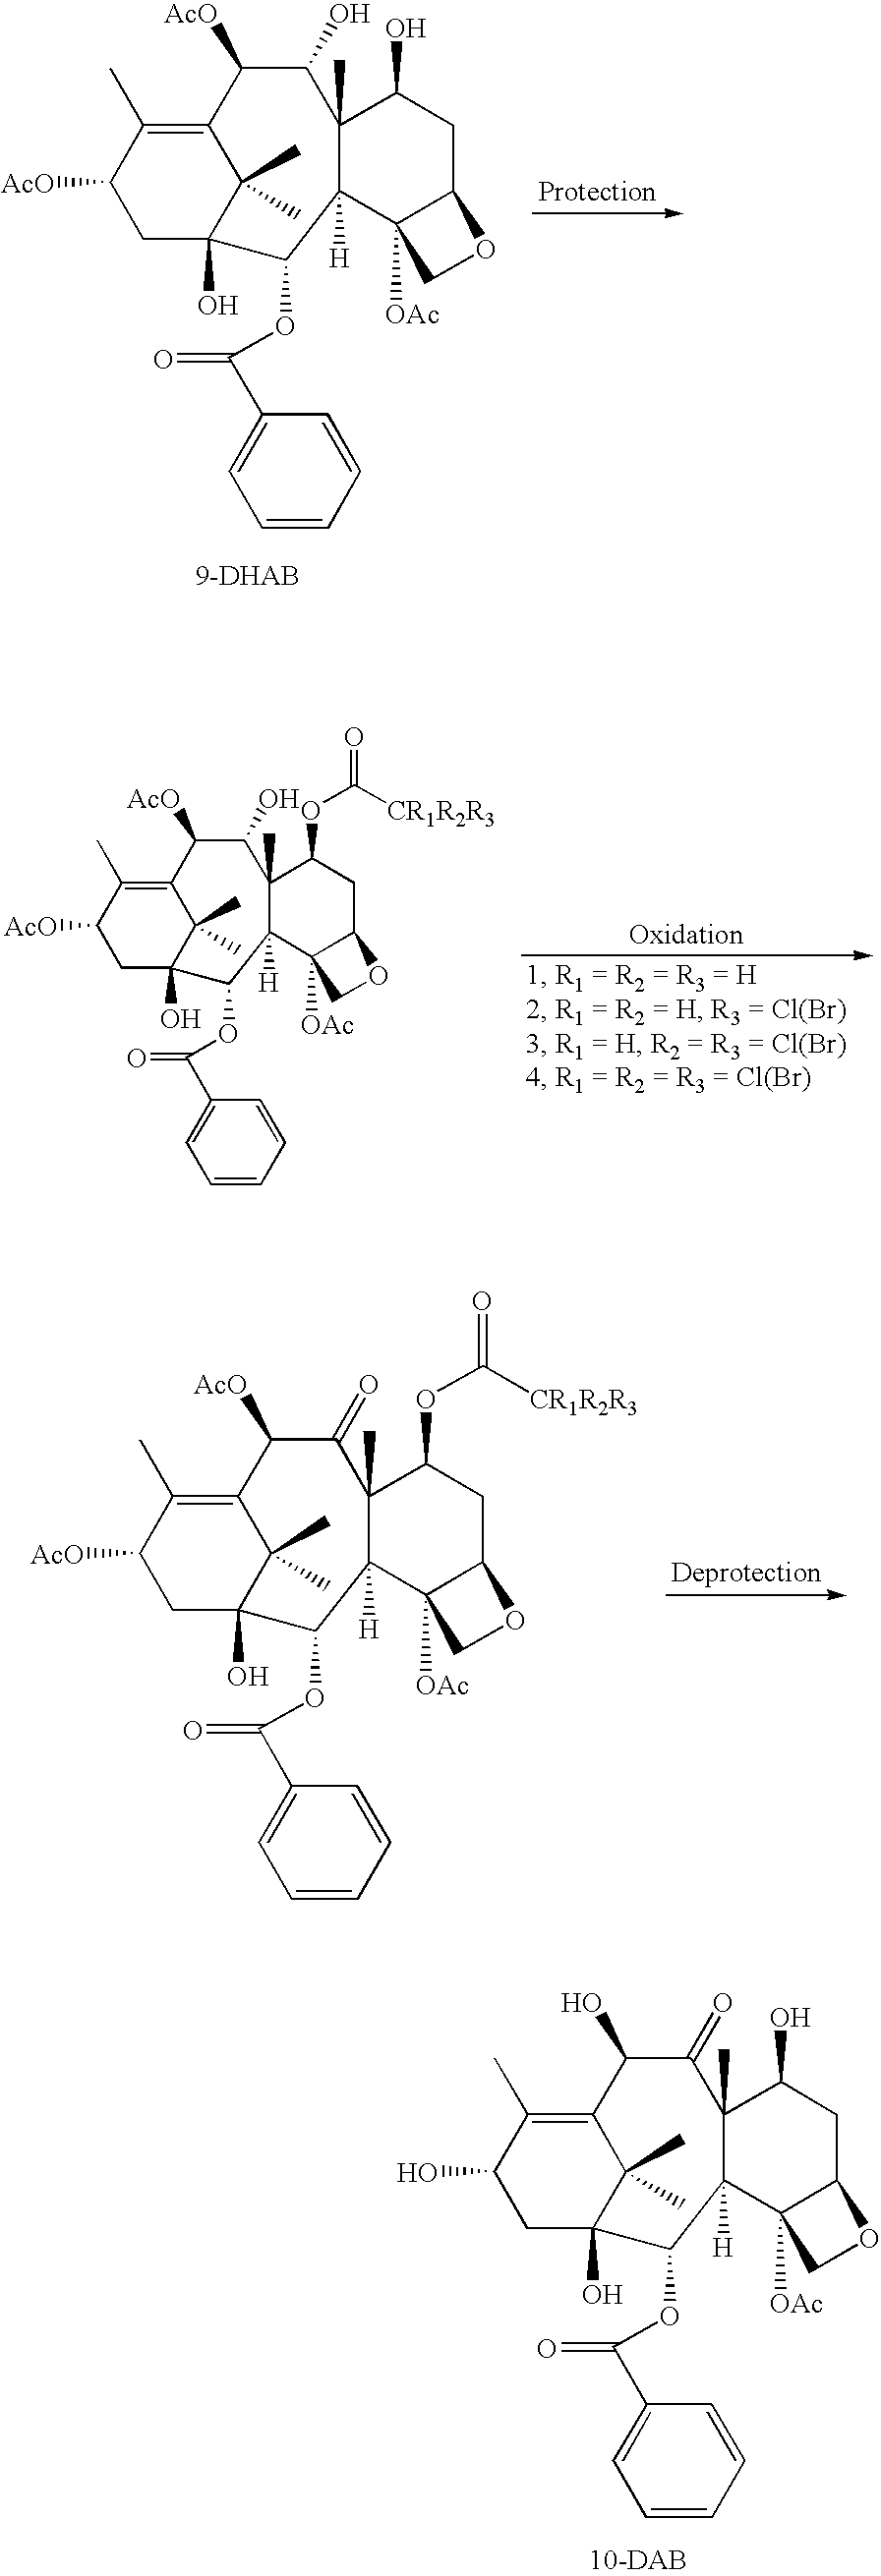 Conversion 9-dihydro-13-acetylbaccatin iii to 10-deacetylbaccatin iii